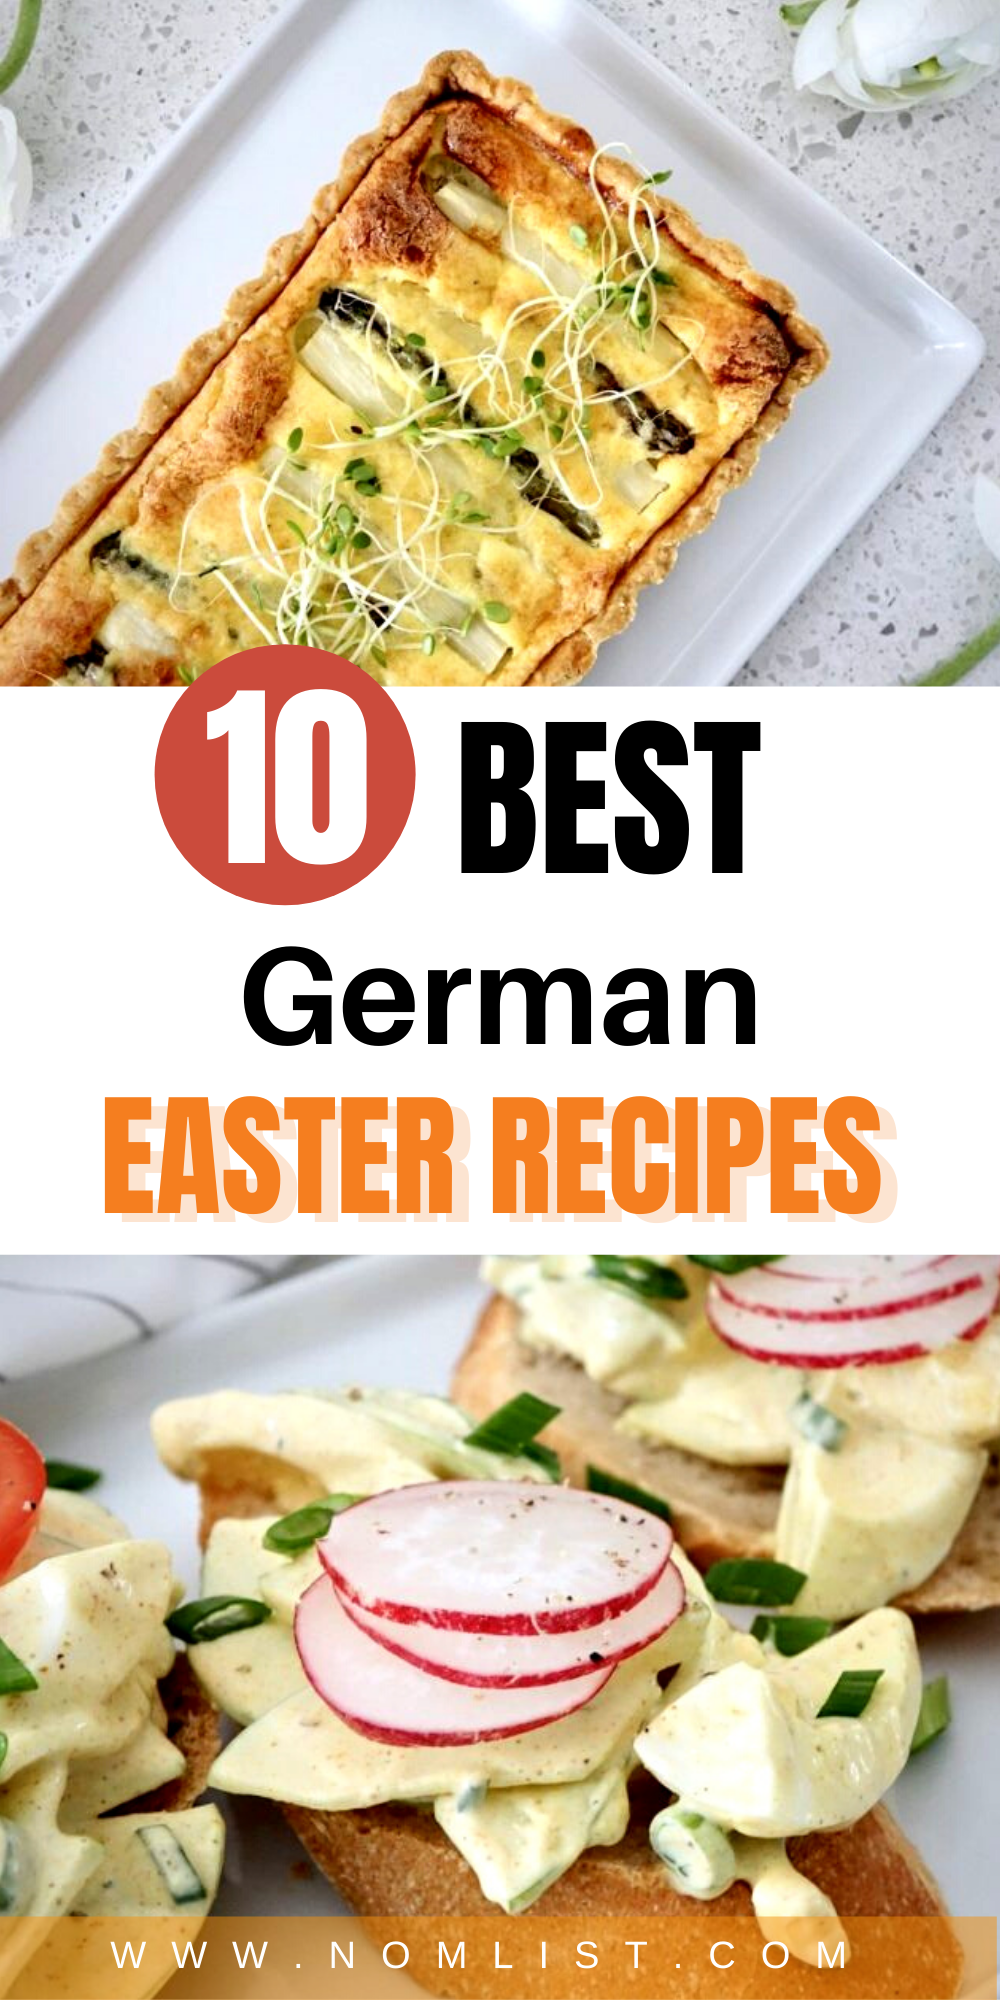 It's time to celebrate Easter with a new kind of cuisine. These delicious German Easter Recipes are a great way to please the whole family with a new twist. You can even make them any time of the year. If you love pastries, baked goods, and eggs, you need to check out the Best German Easter Recipes.